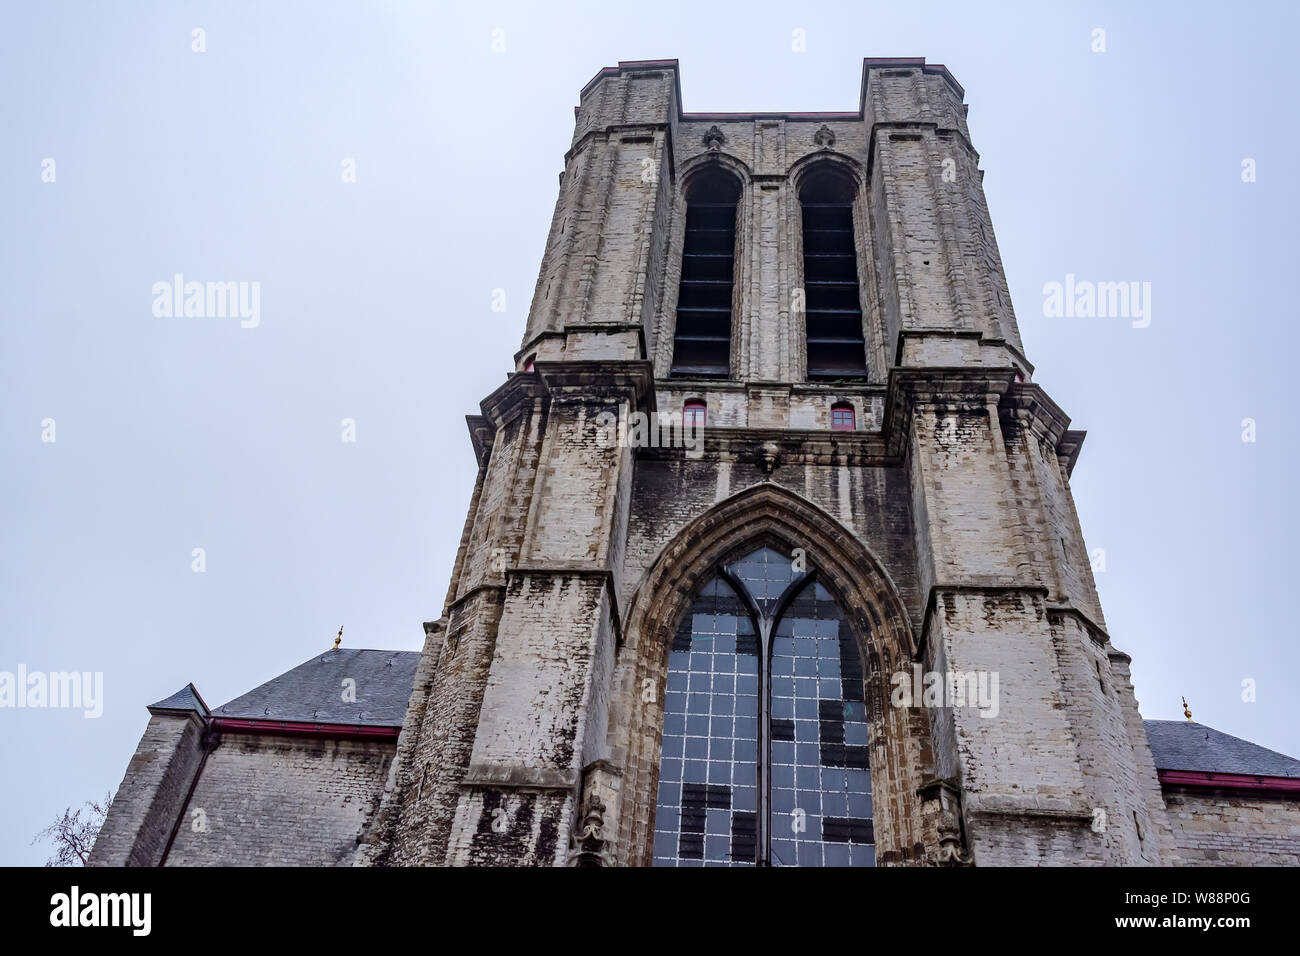 The unfinished western tower of medieval Saint Michael's Church built in late Gothic style in Ghent, Belgium. Facade of a Roman Catholic church. Stock Photo